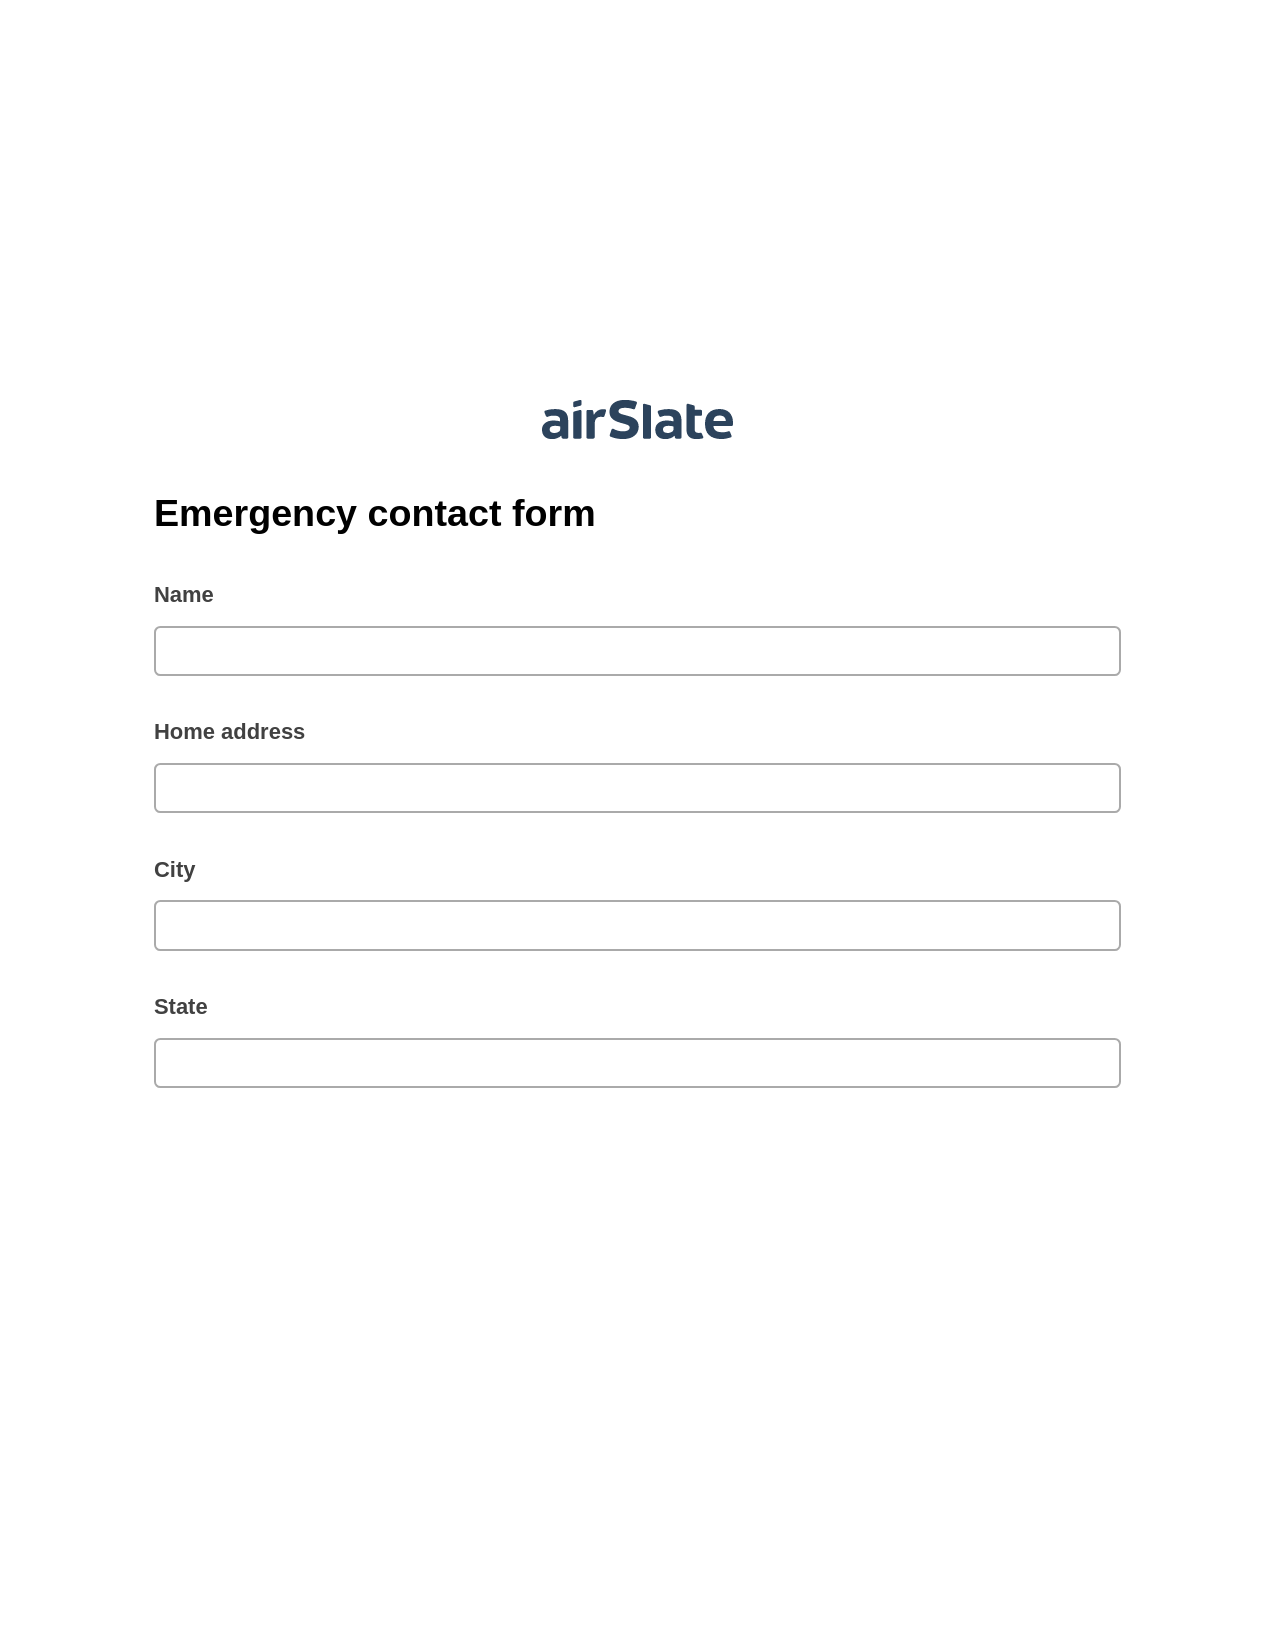 Emergency contact form Pre-fill Slate from MS Dynamics 365 Records Bot, Mailchimp send Campaign bot, Export to MySQL Bot